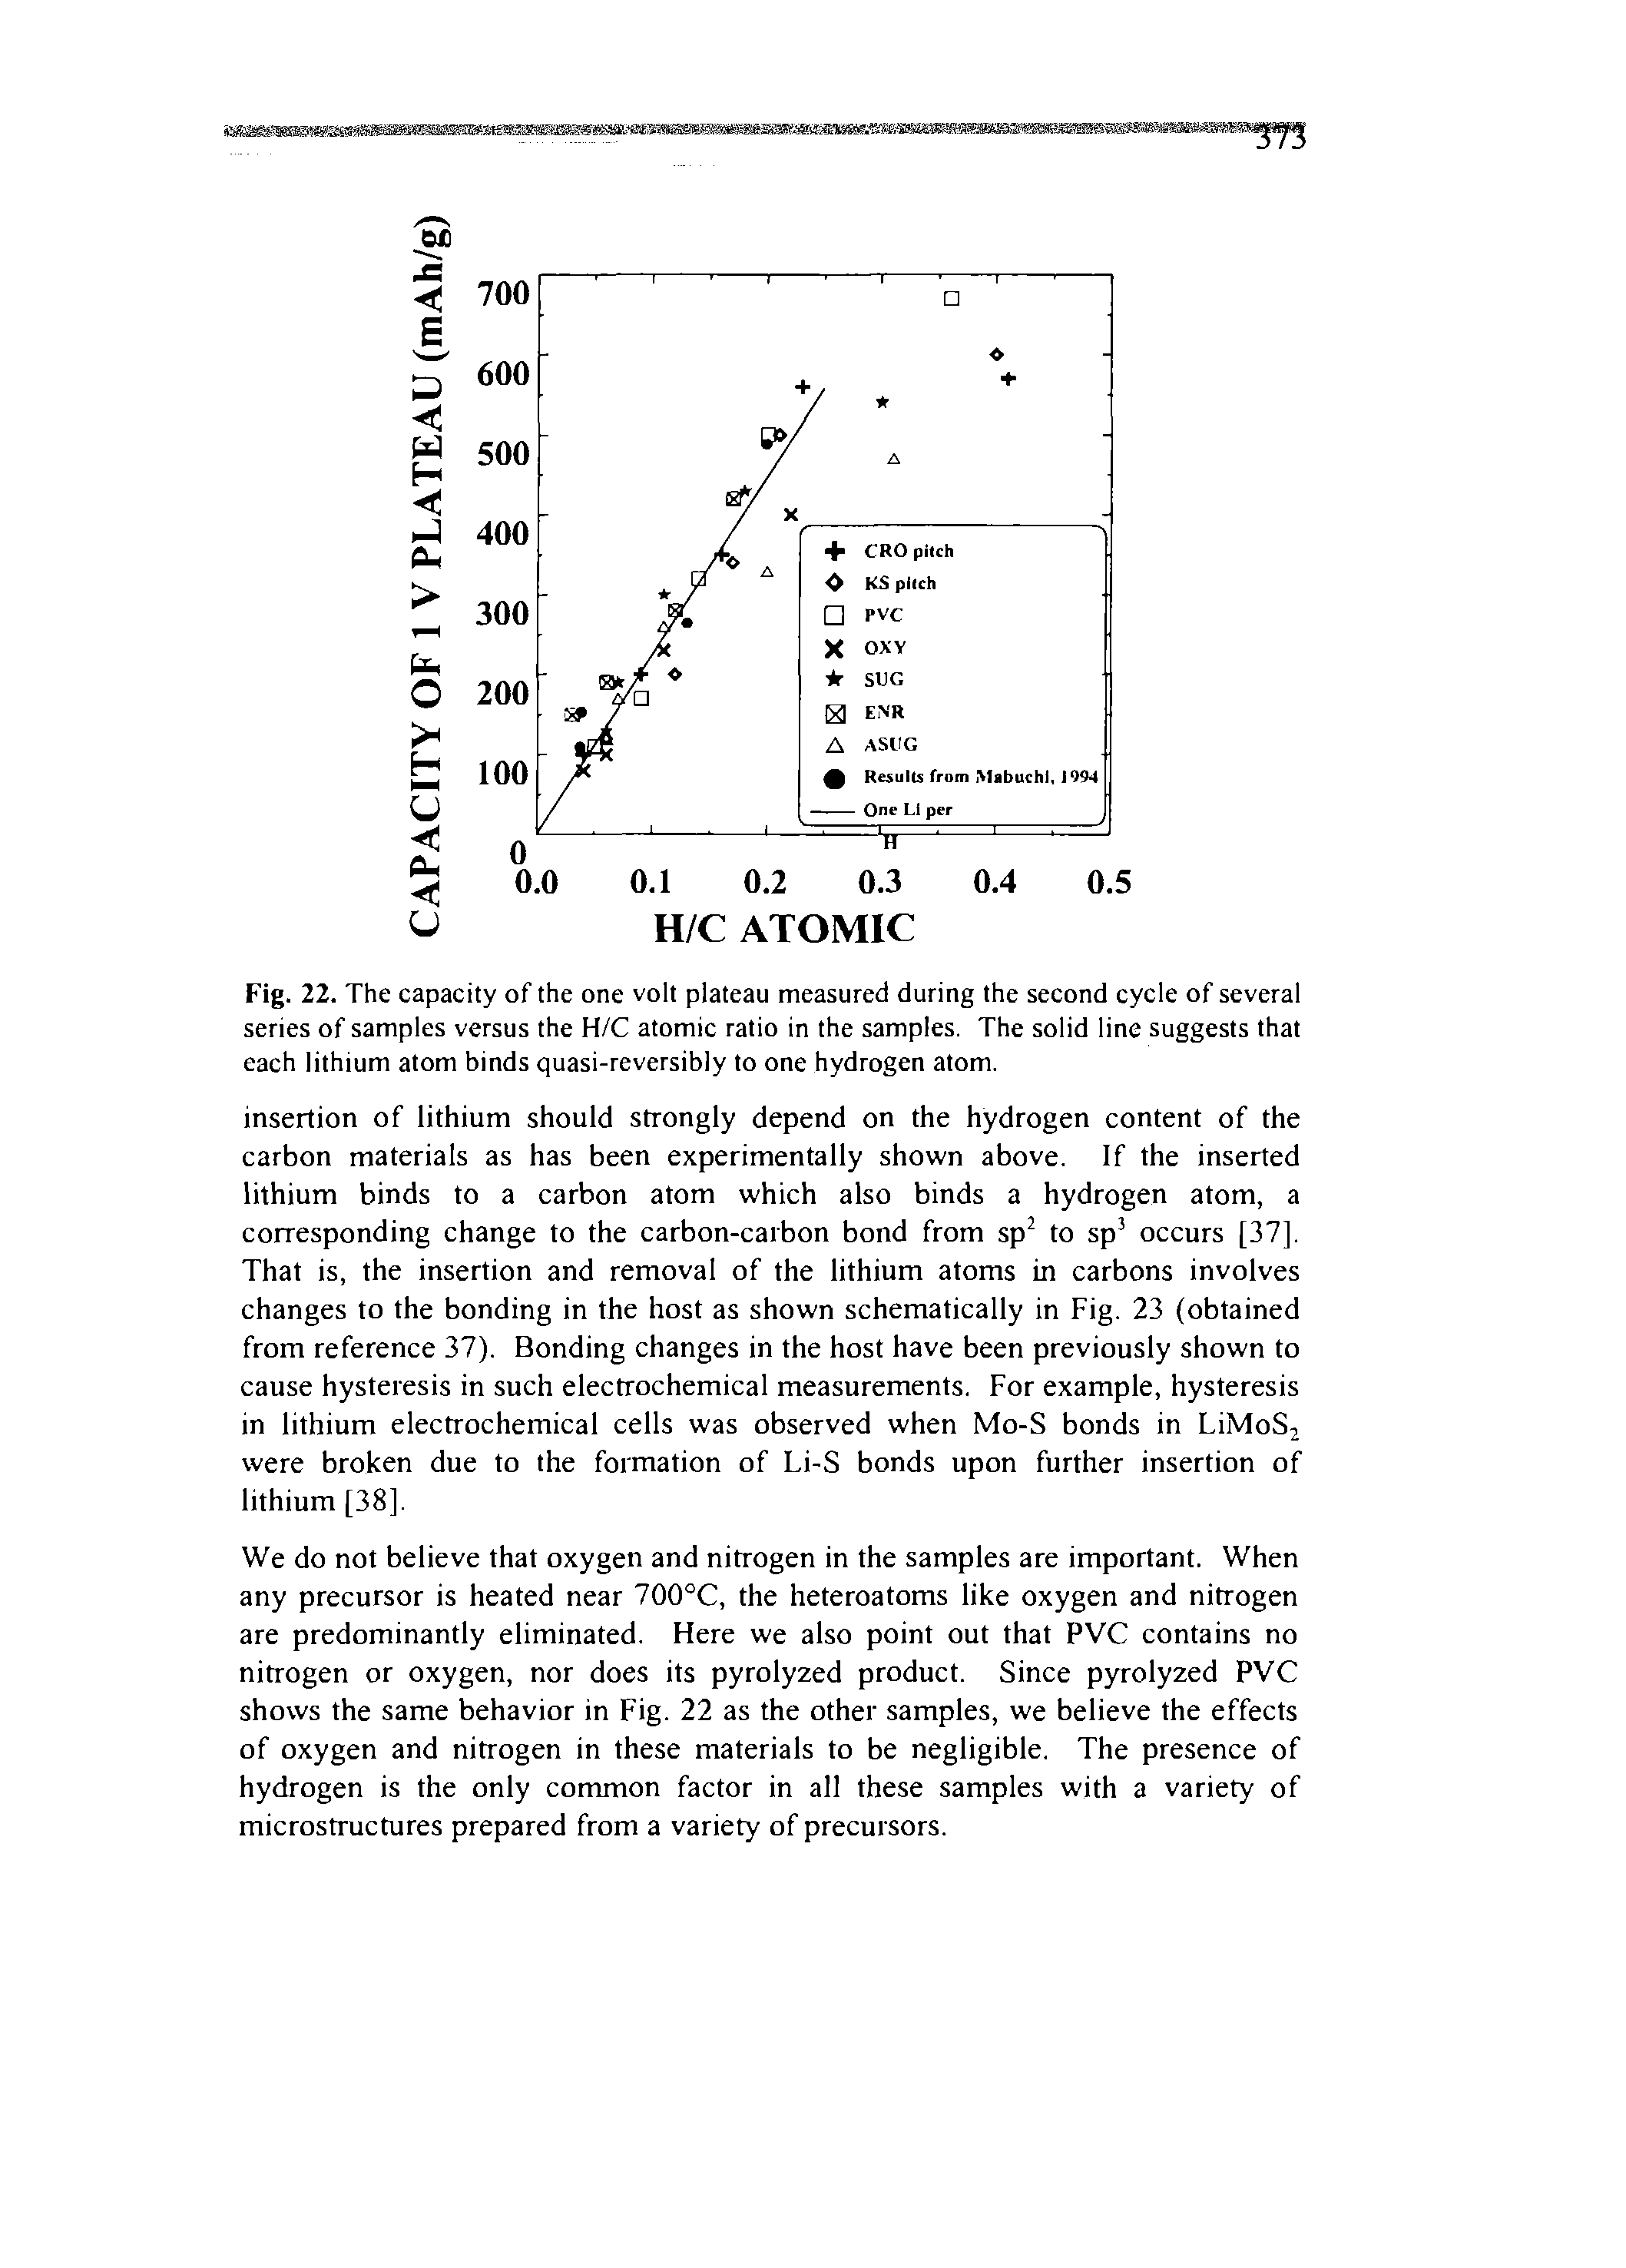 Fig. 22. The capacity of the one volt plateau measured during the second cycle of several series of samples versus the H/C atomic ratio in the samples. The solid line suggests that each lithium atom binds quasi-reversibly to one hydrogen atom.